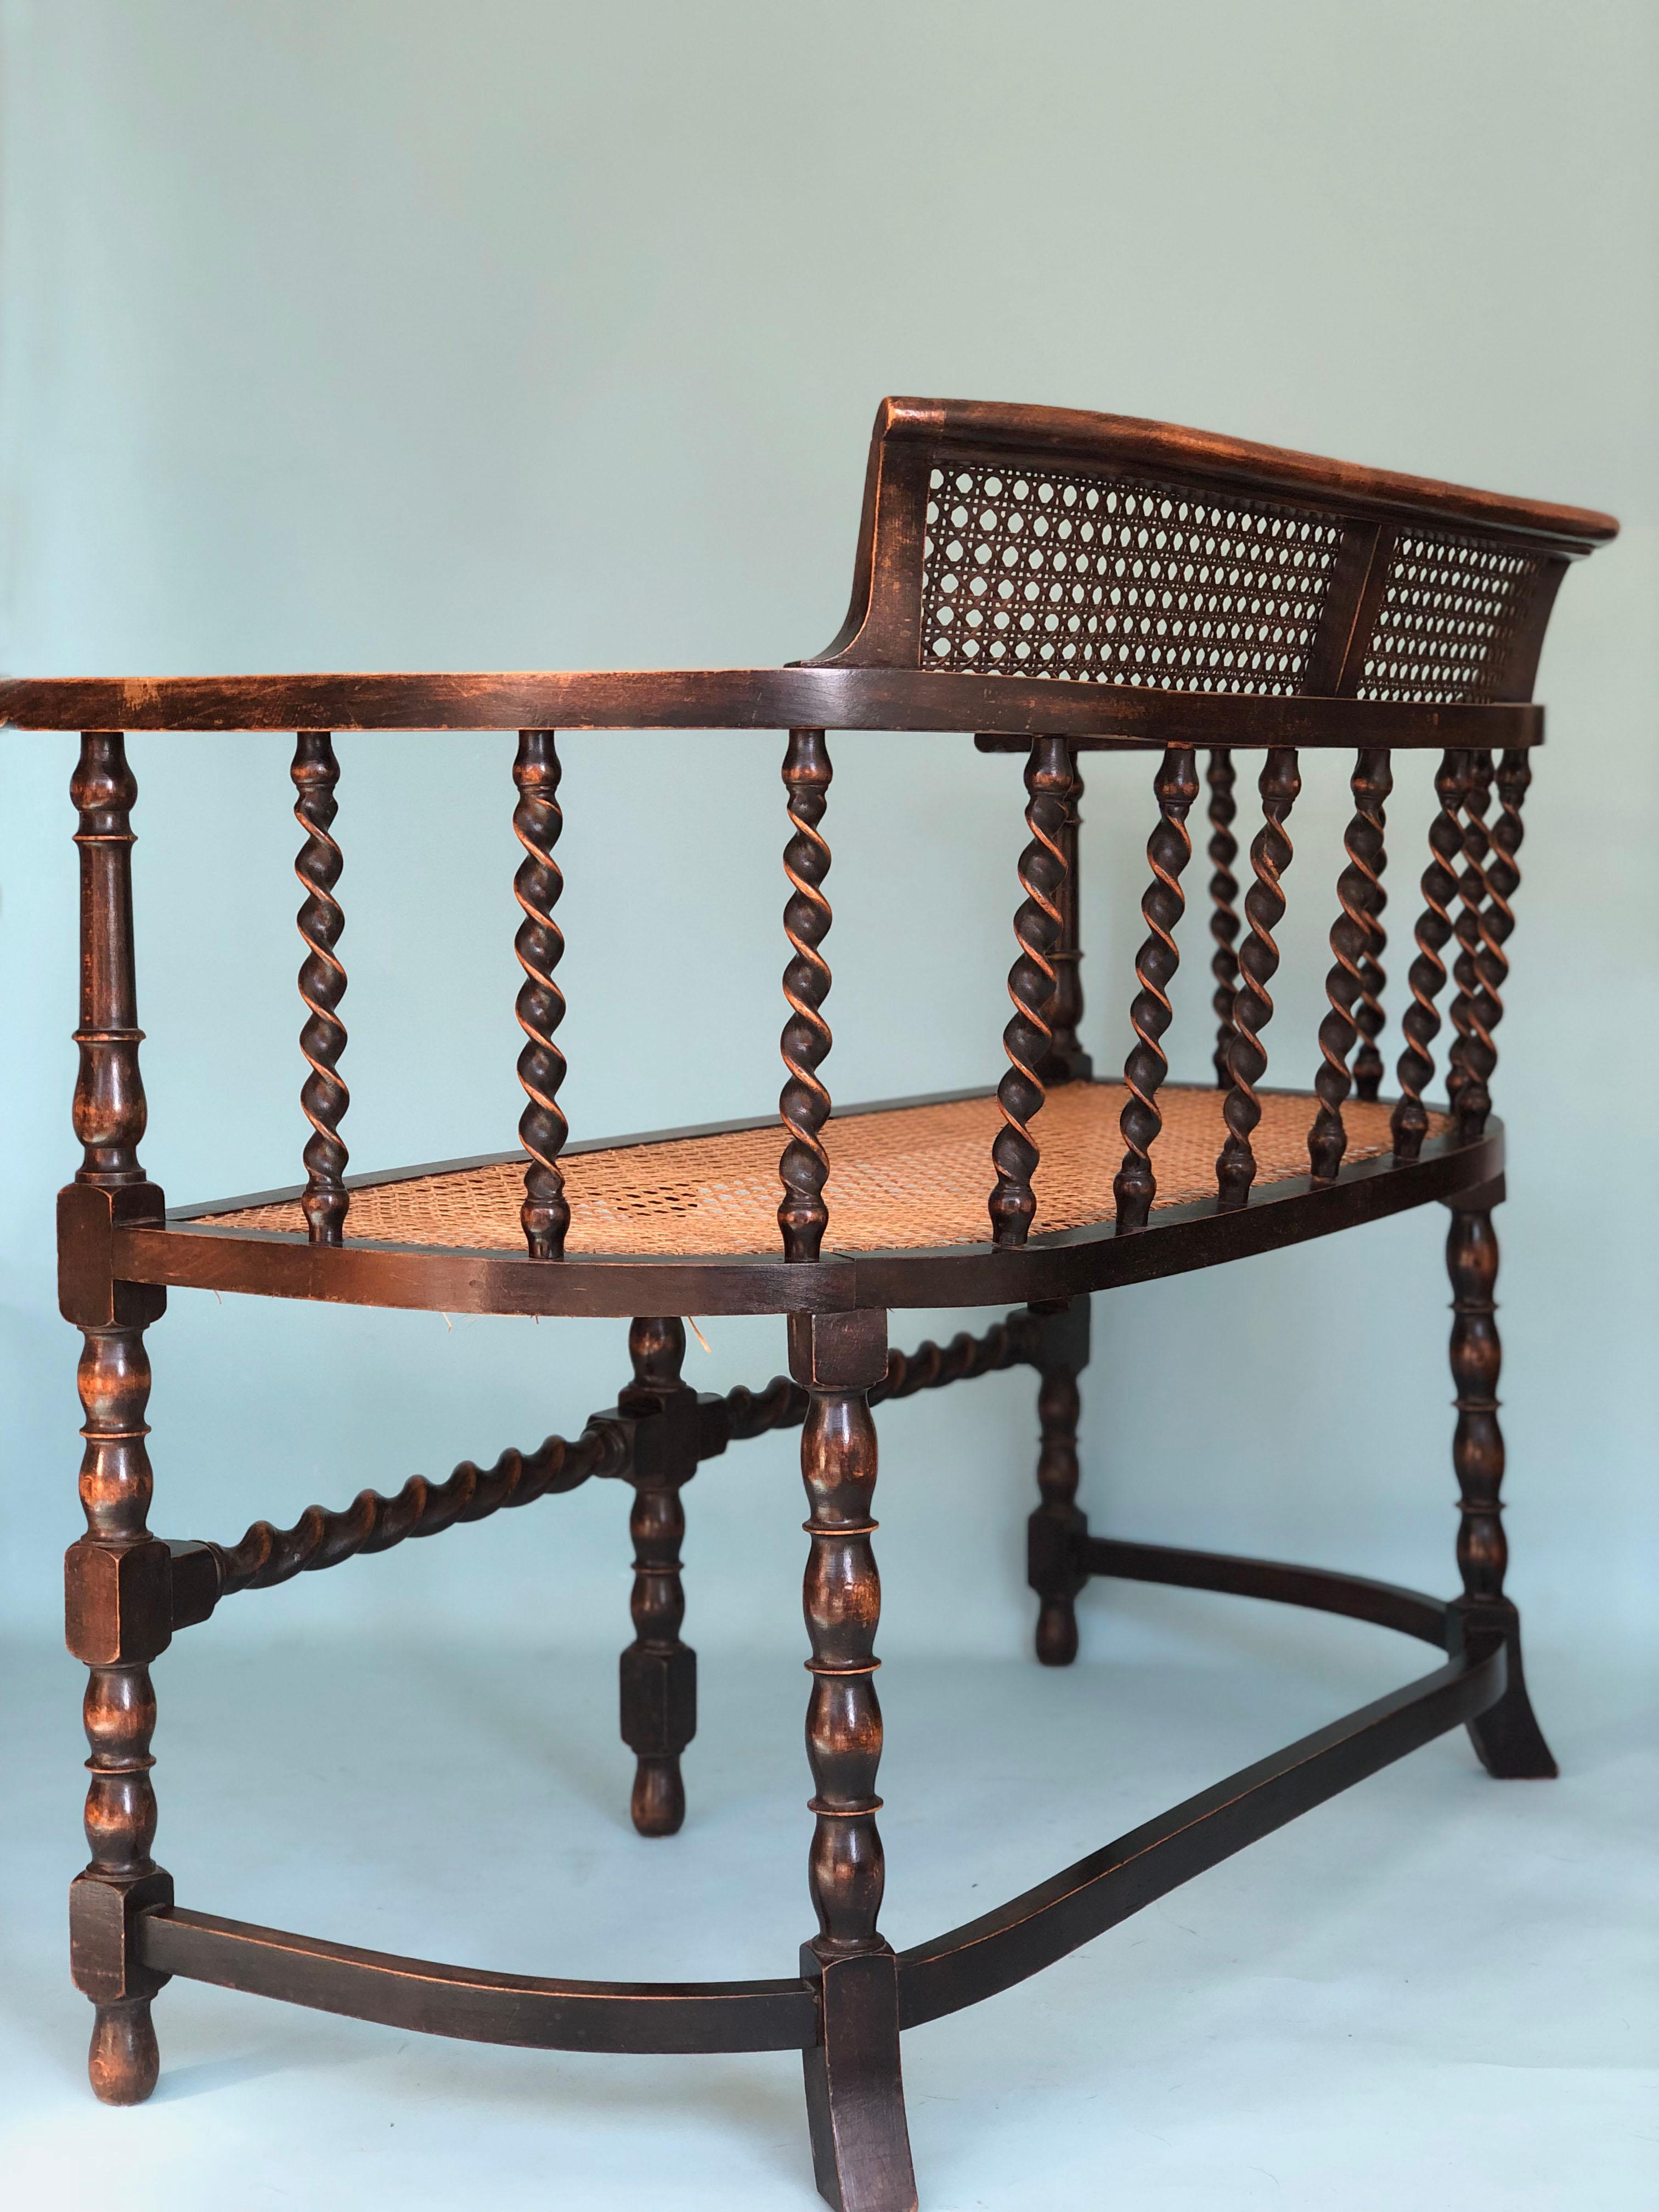 An English Edwardian bench with cane, barley twist supports and bobbin turned legs from the early 20th century. The beech wood chair and cane are in very good condition. The cane seat is from a later period. The cane in the back is original.


A